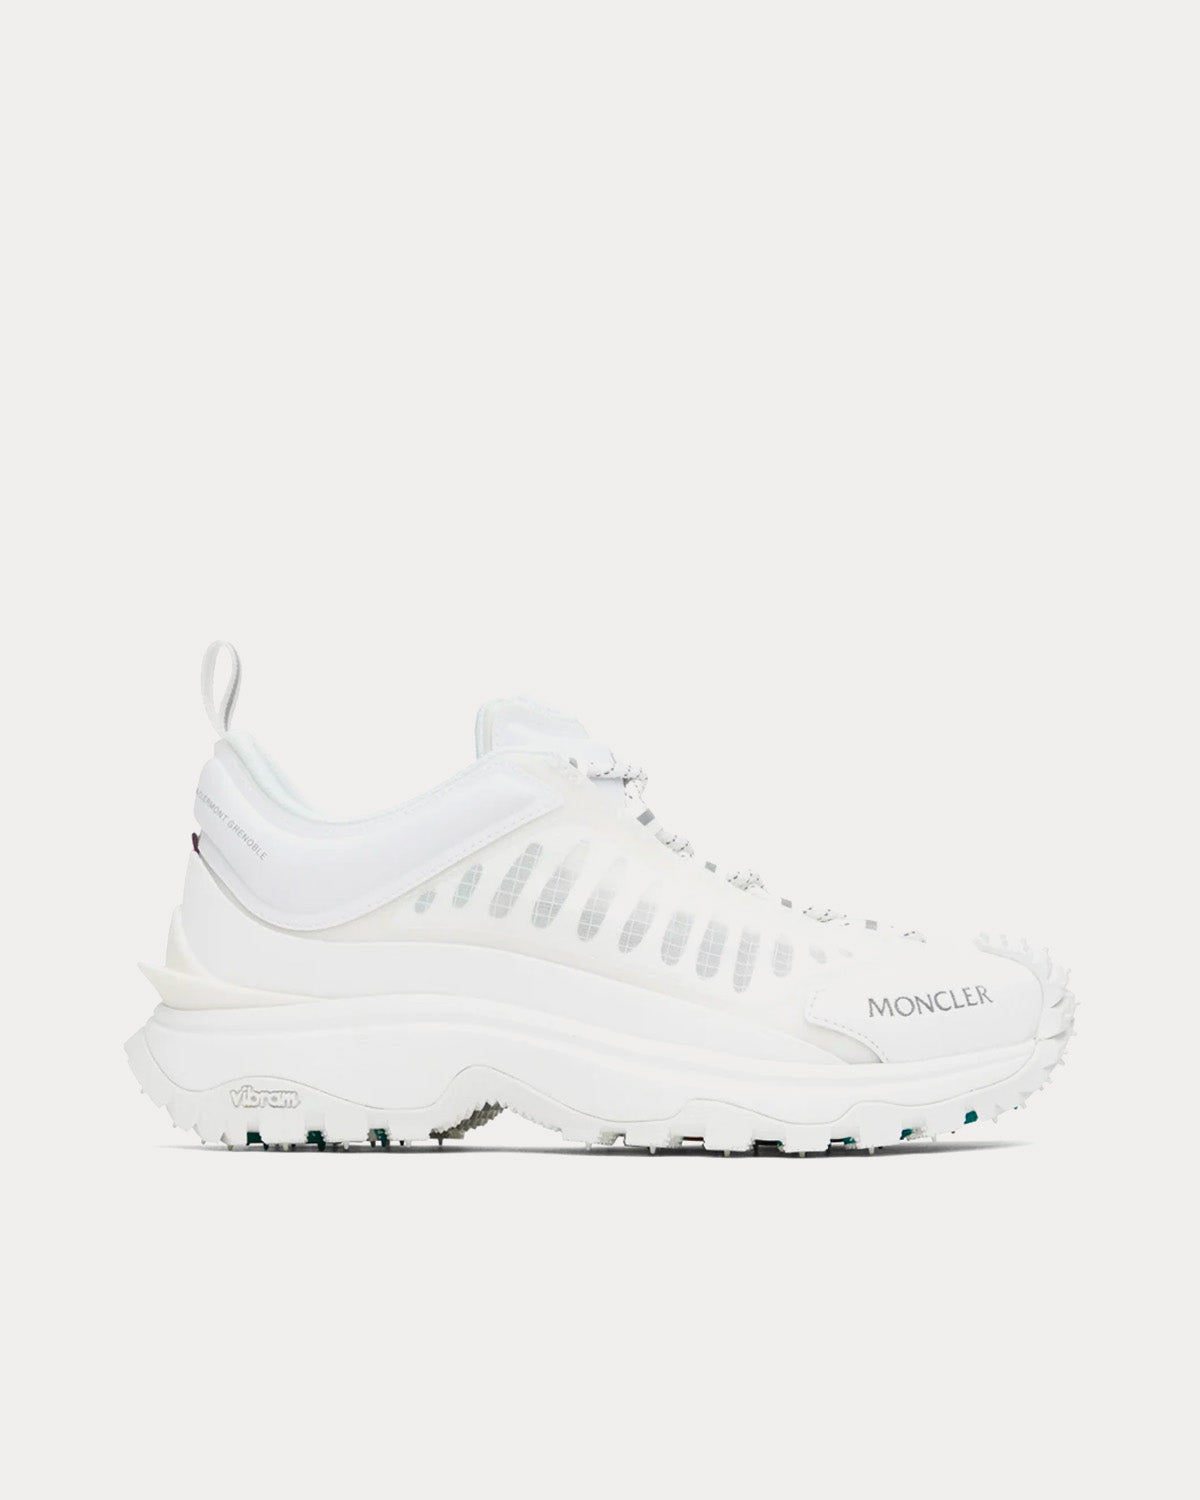 Moncler - Trailgrip Lite White Low Top Sneakers